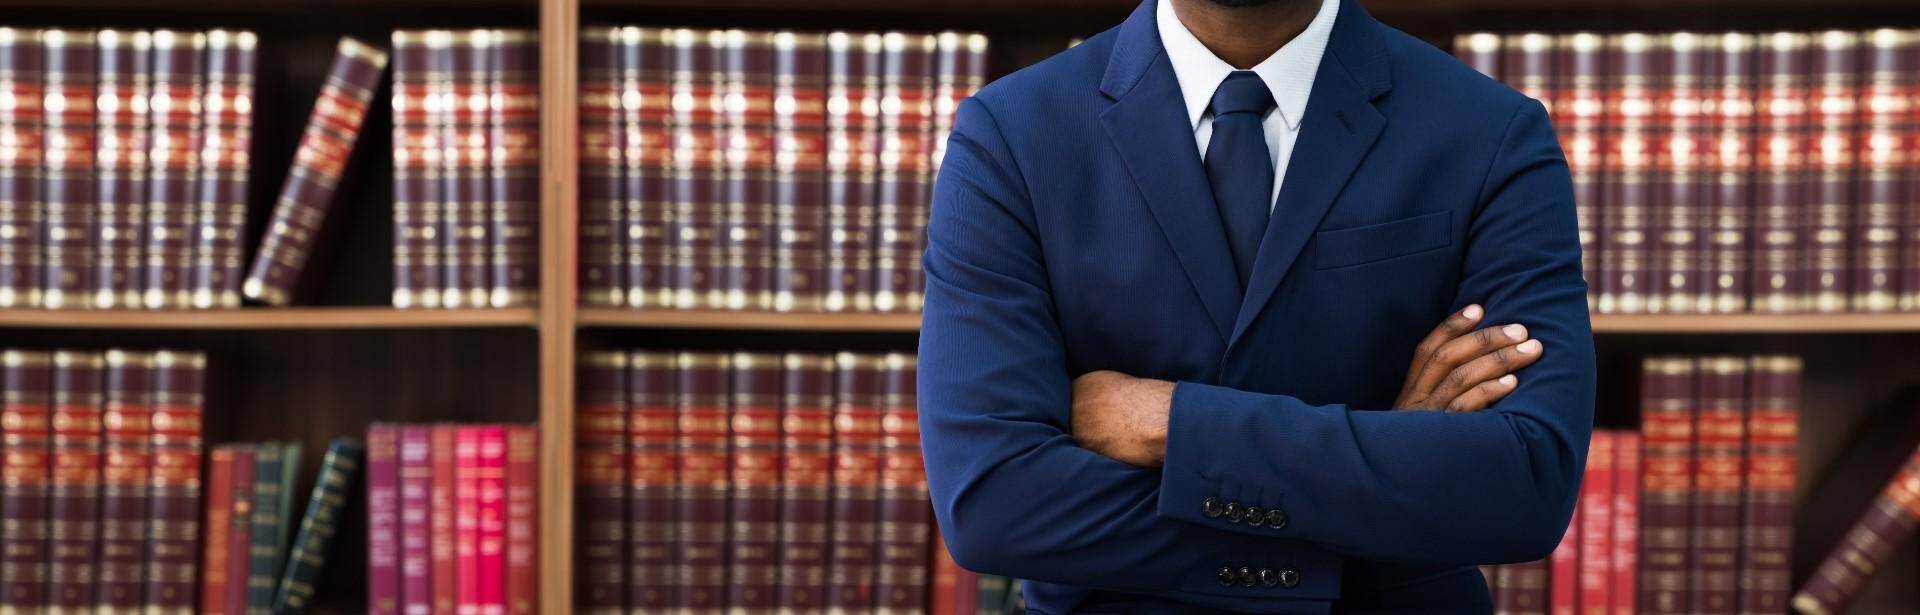 A black lawyer standing in front of a bookshelf of law book in Milton, Georgia